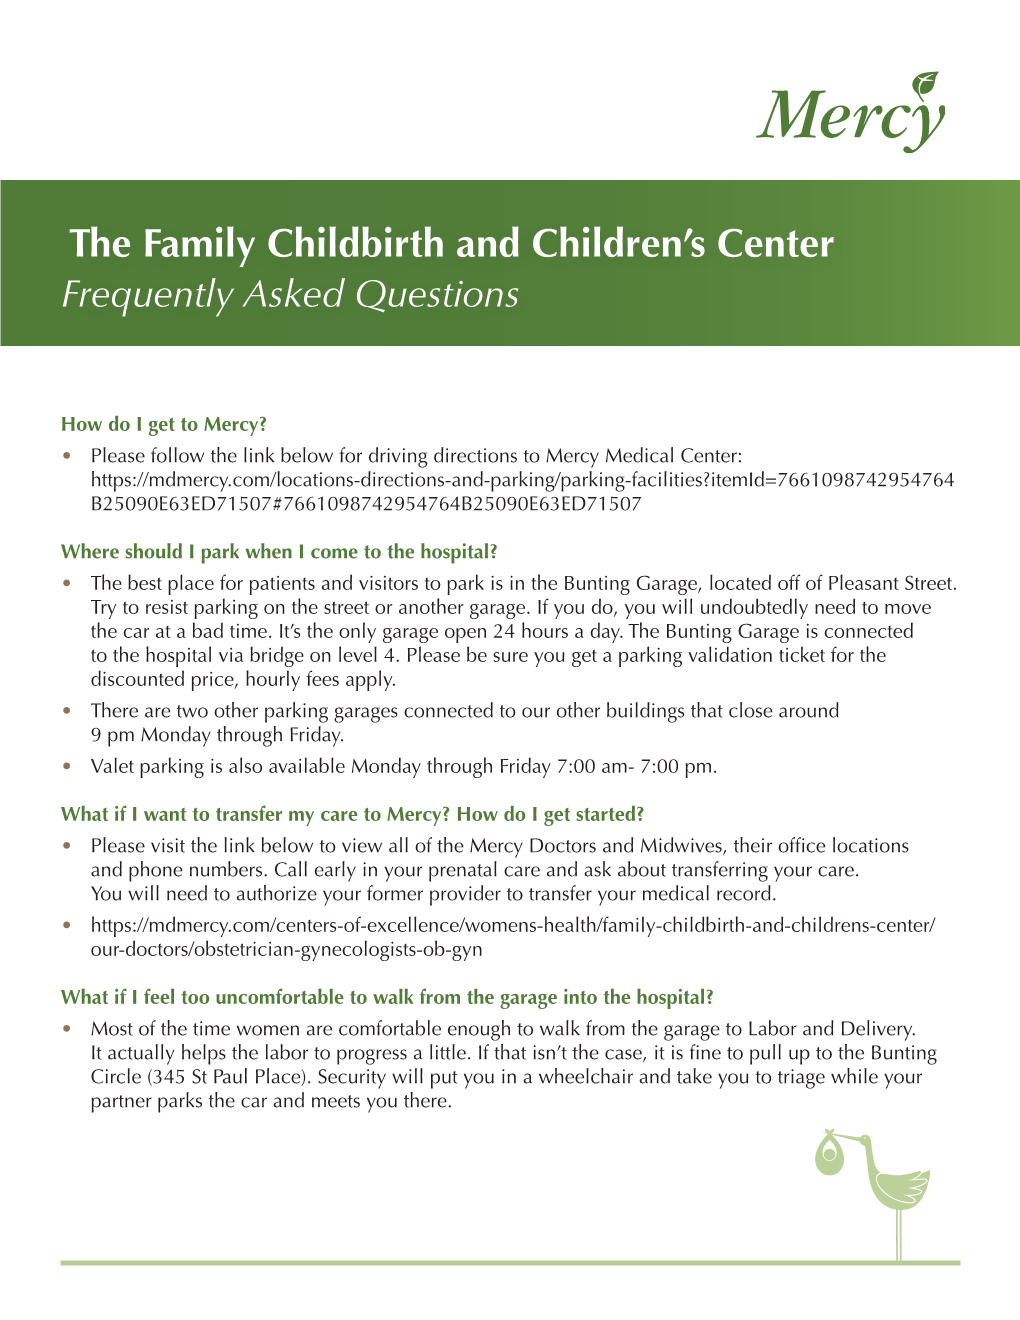 The Family Childbirth and Children's Center